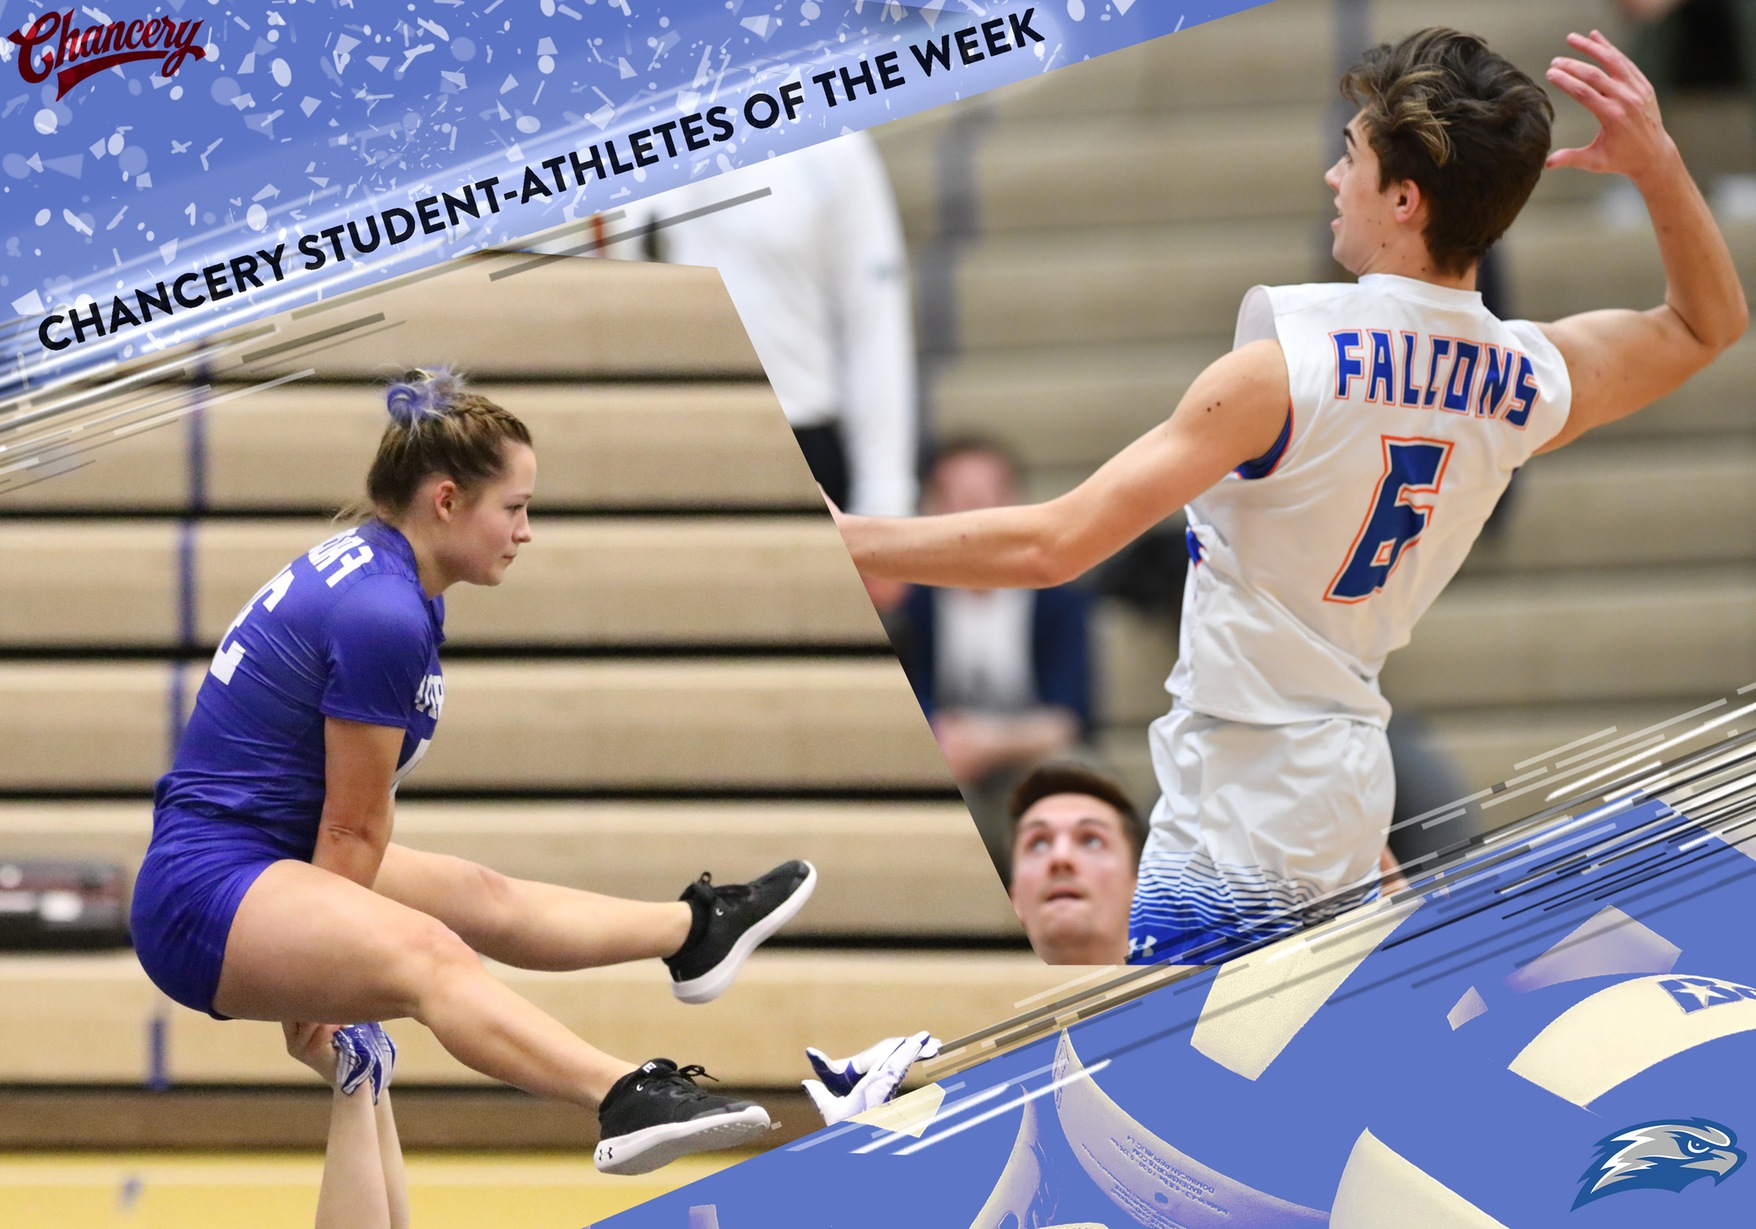 2019-20 Chancery Student-Athletes of the Week